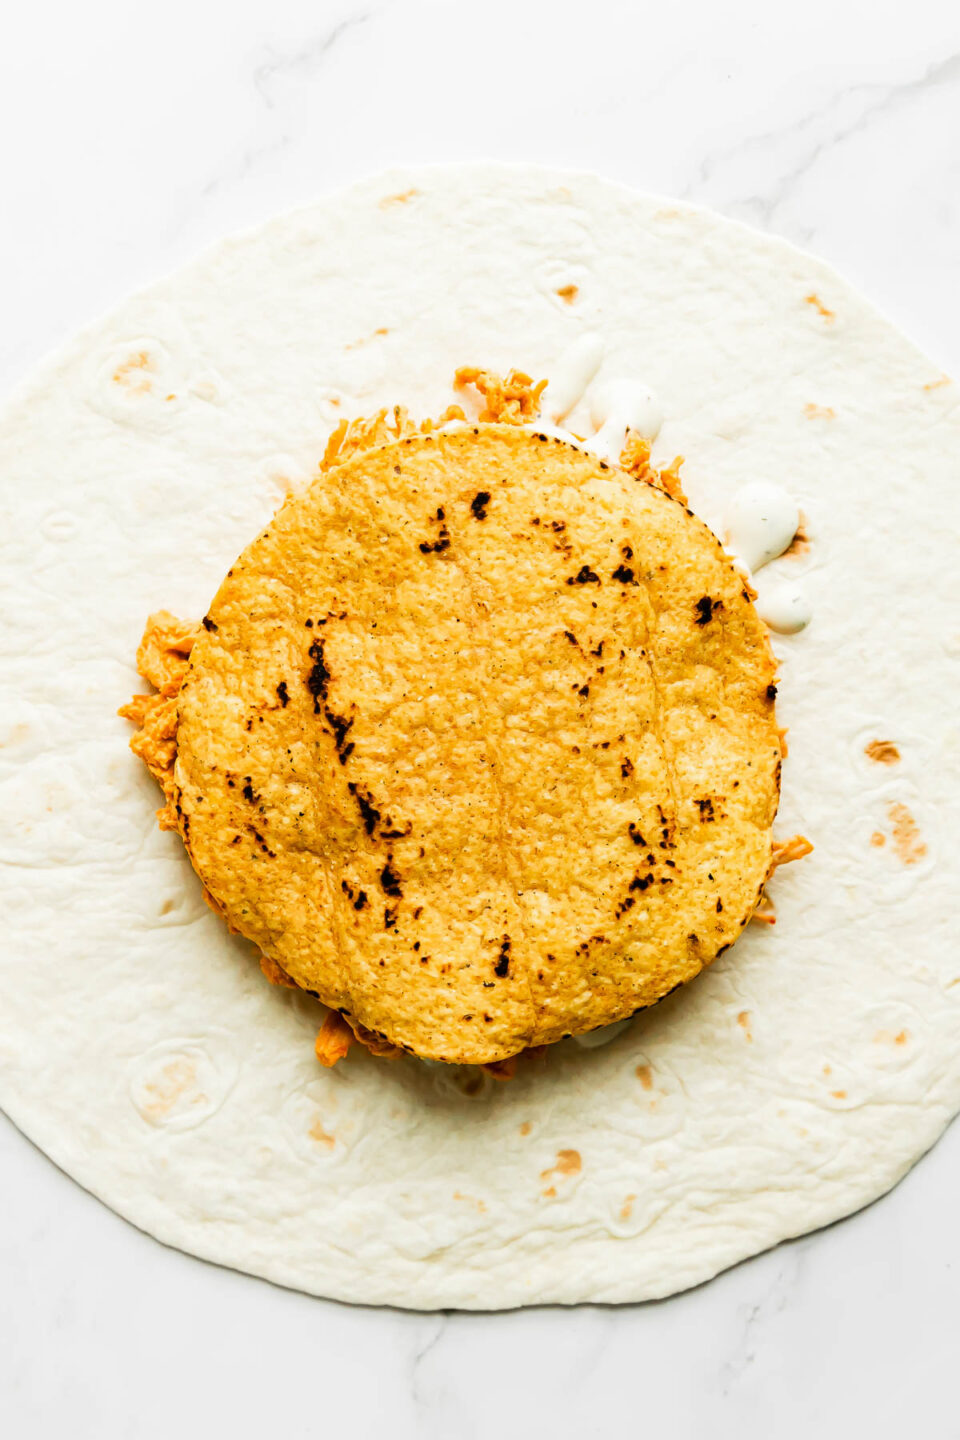 How to make buffalo crunch wraps, step 4: Assemble the buffalo chicken crunchwraps. A flour tortilla lays flat on a white and gray marble surface. A single tostada has been placed atop of shredded buffalo chicken drizzled with ranch dressing that has been piled atop the flour tortilla.